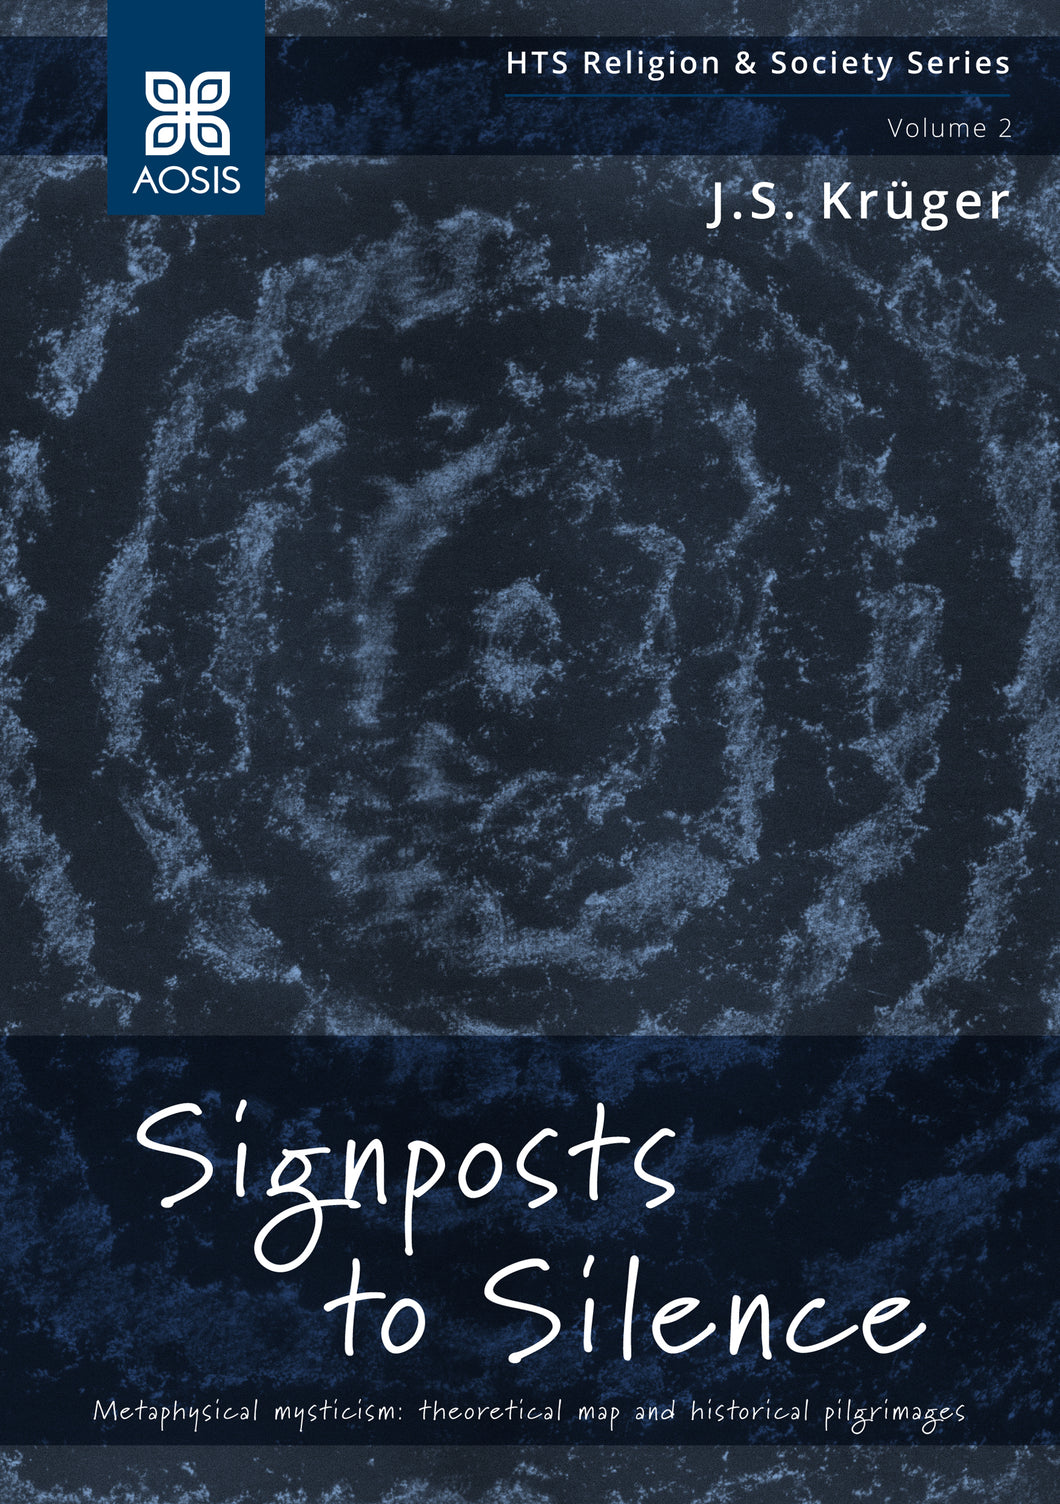 Signposts to Silence: Metaphysical mysticism: theoretical map and historical pilgrimages (Hardcover)